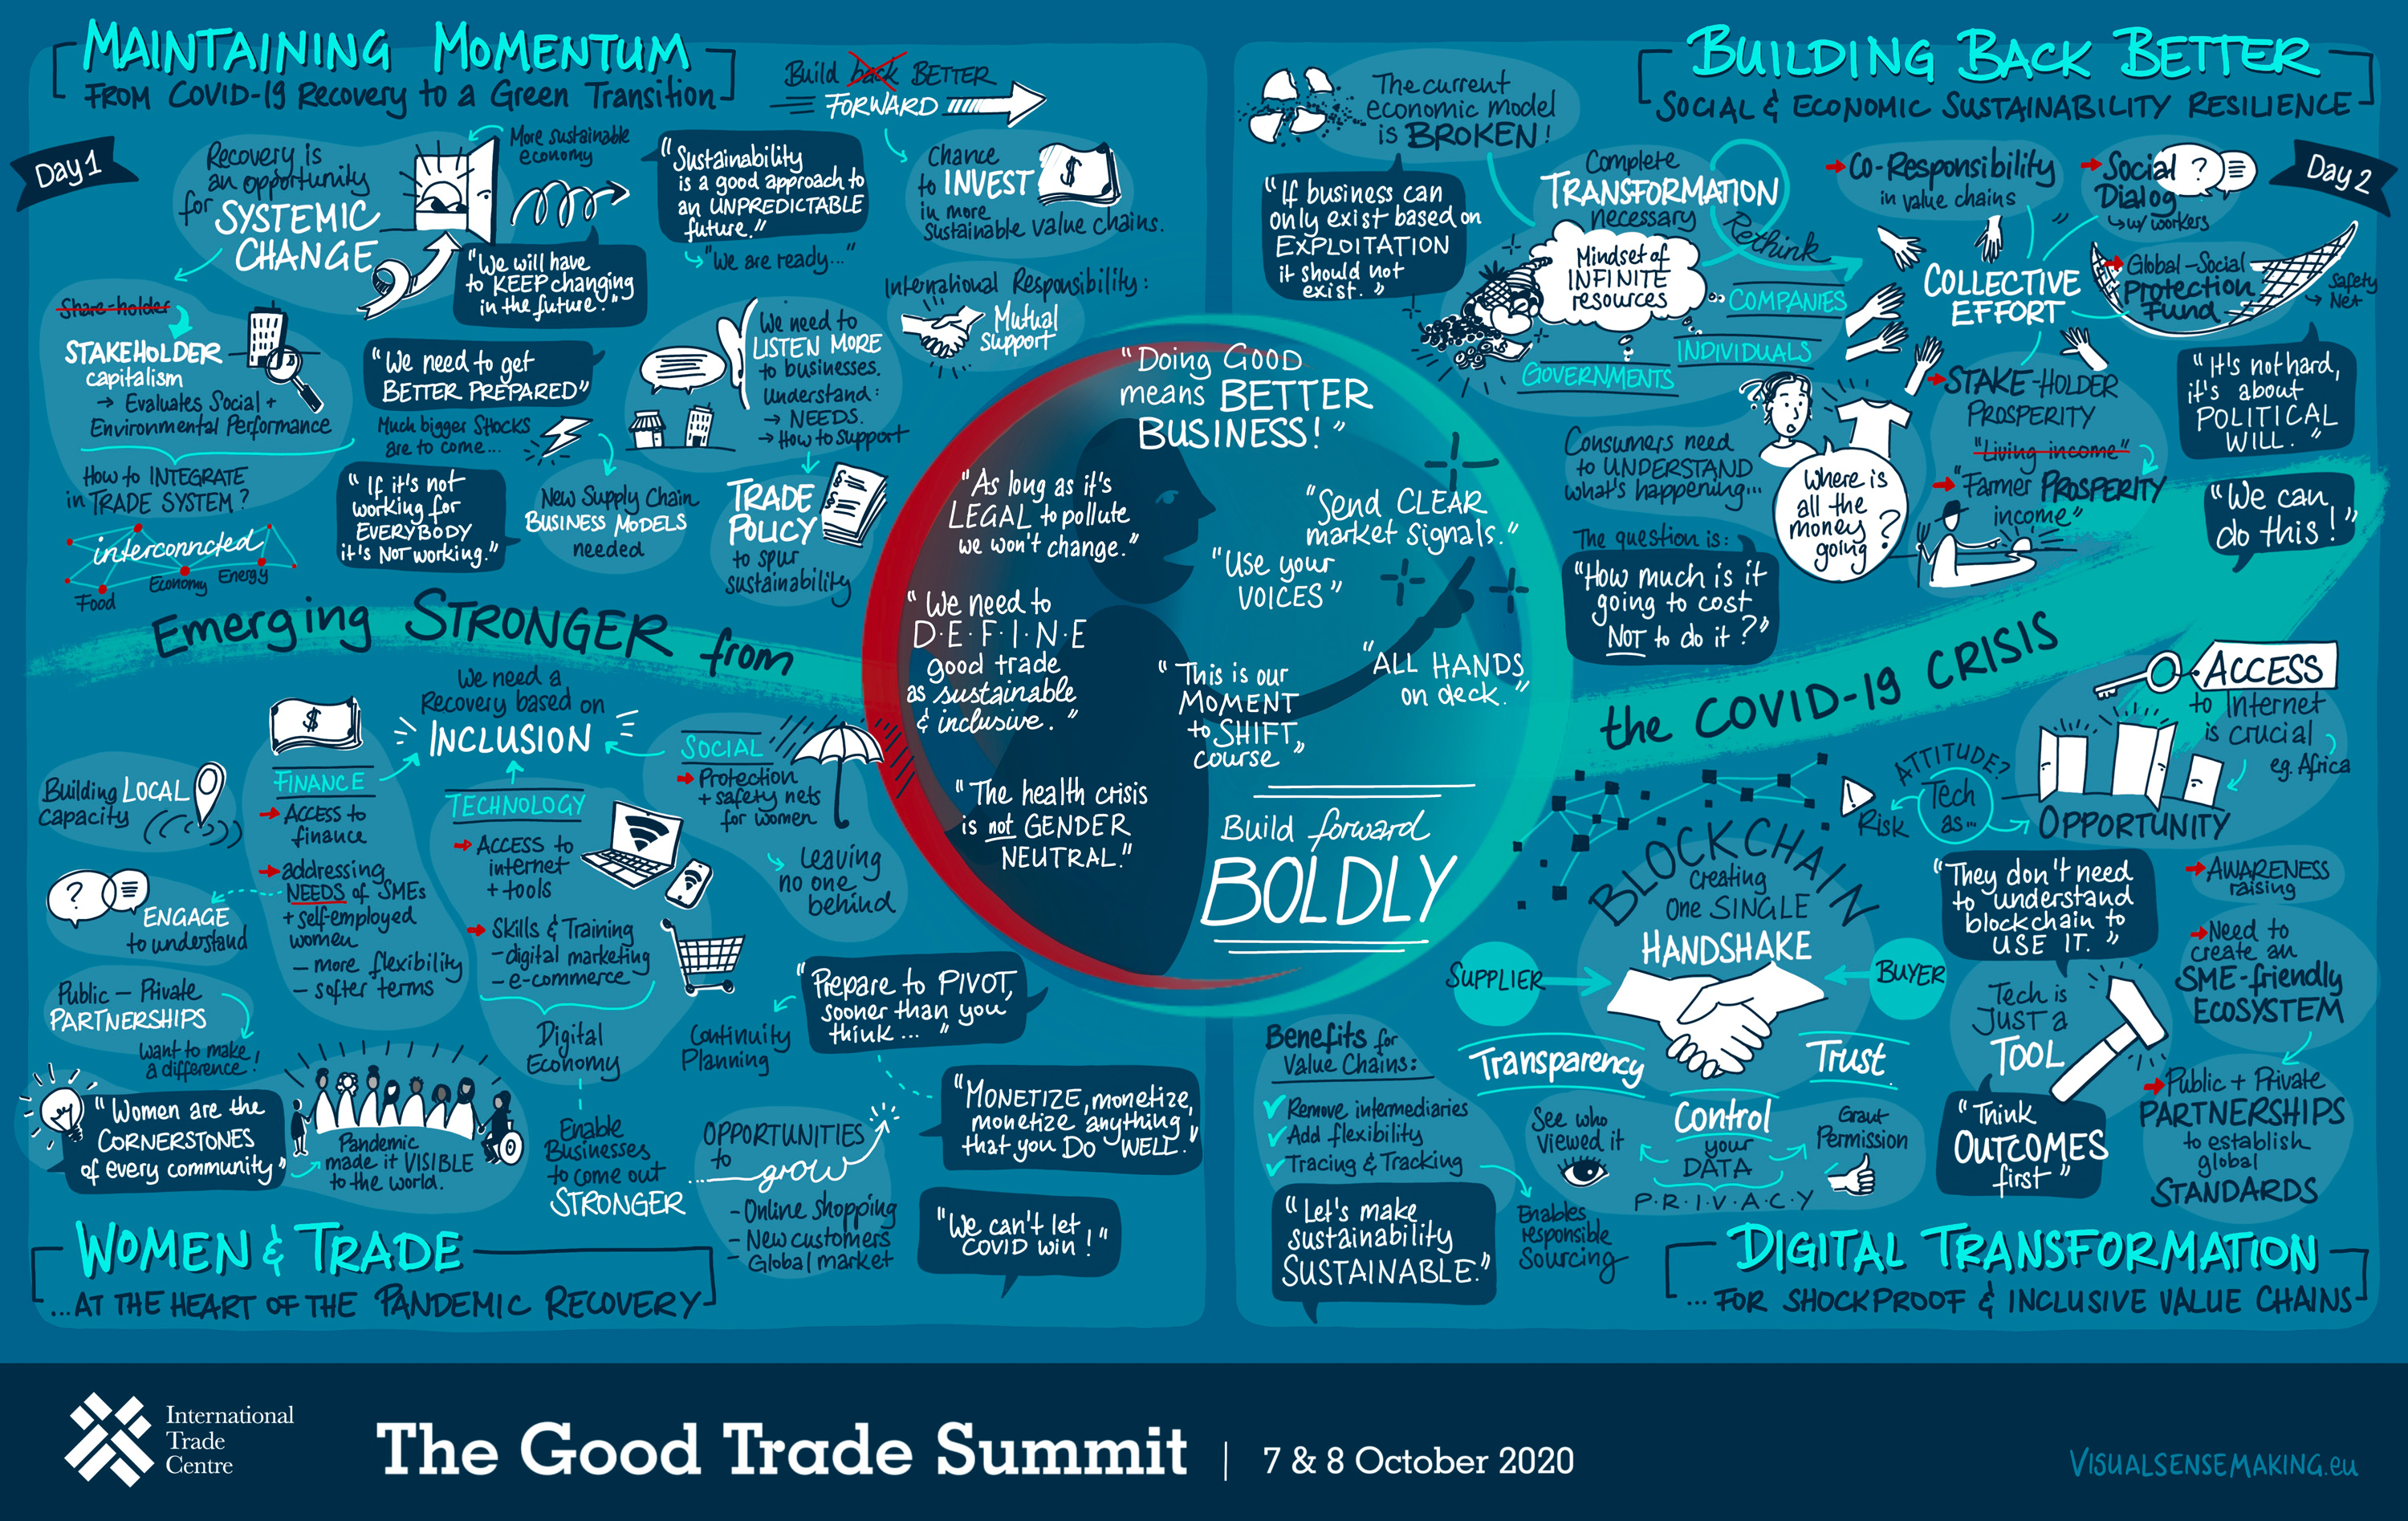 Visual summary of the 4 main panel discussions at the Good Trade Summit